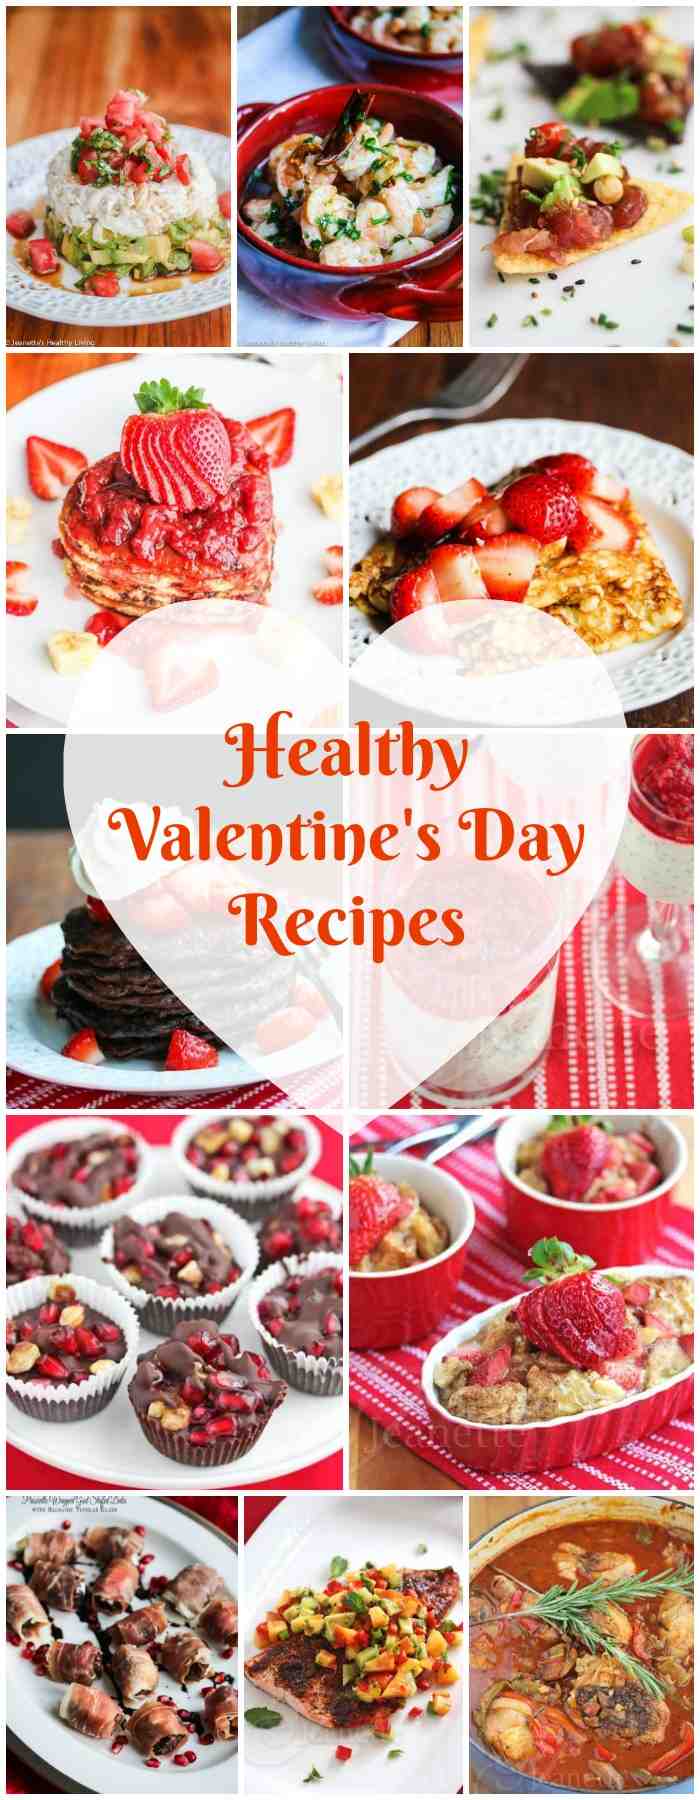 Healthy Valentines Day Recipes - treat your sweetheart to these delicious romantic dishes, from breakfast through dinner